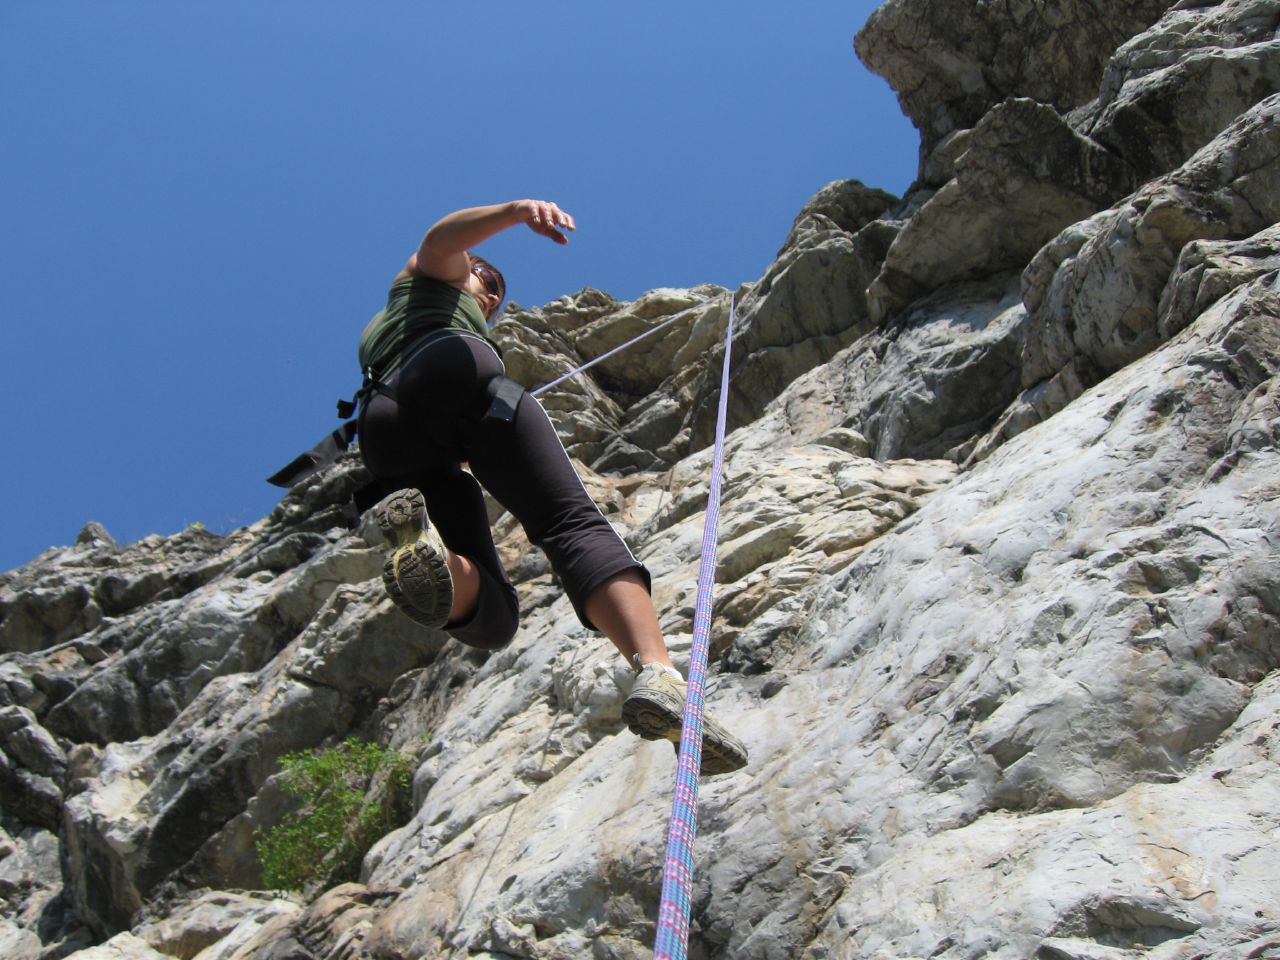 person on steep rocky area about to jump